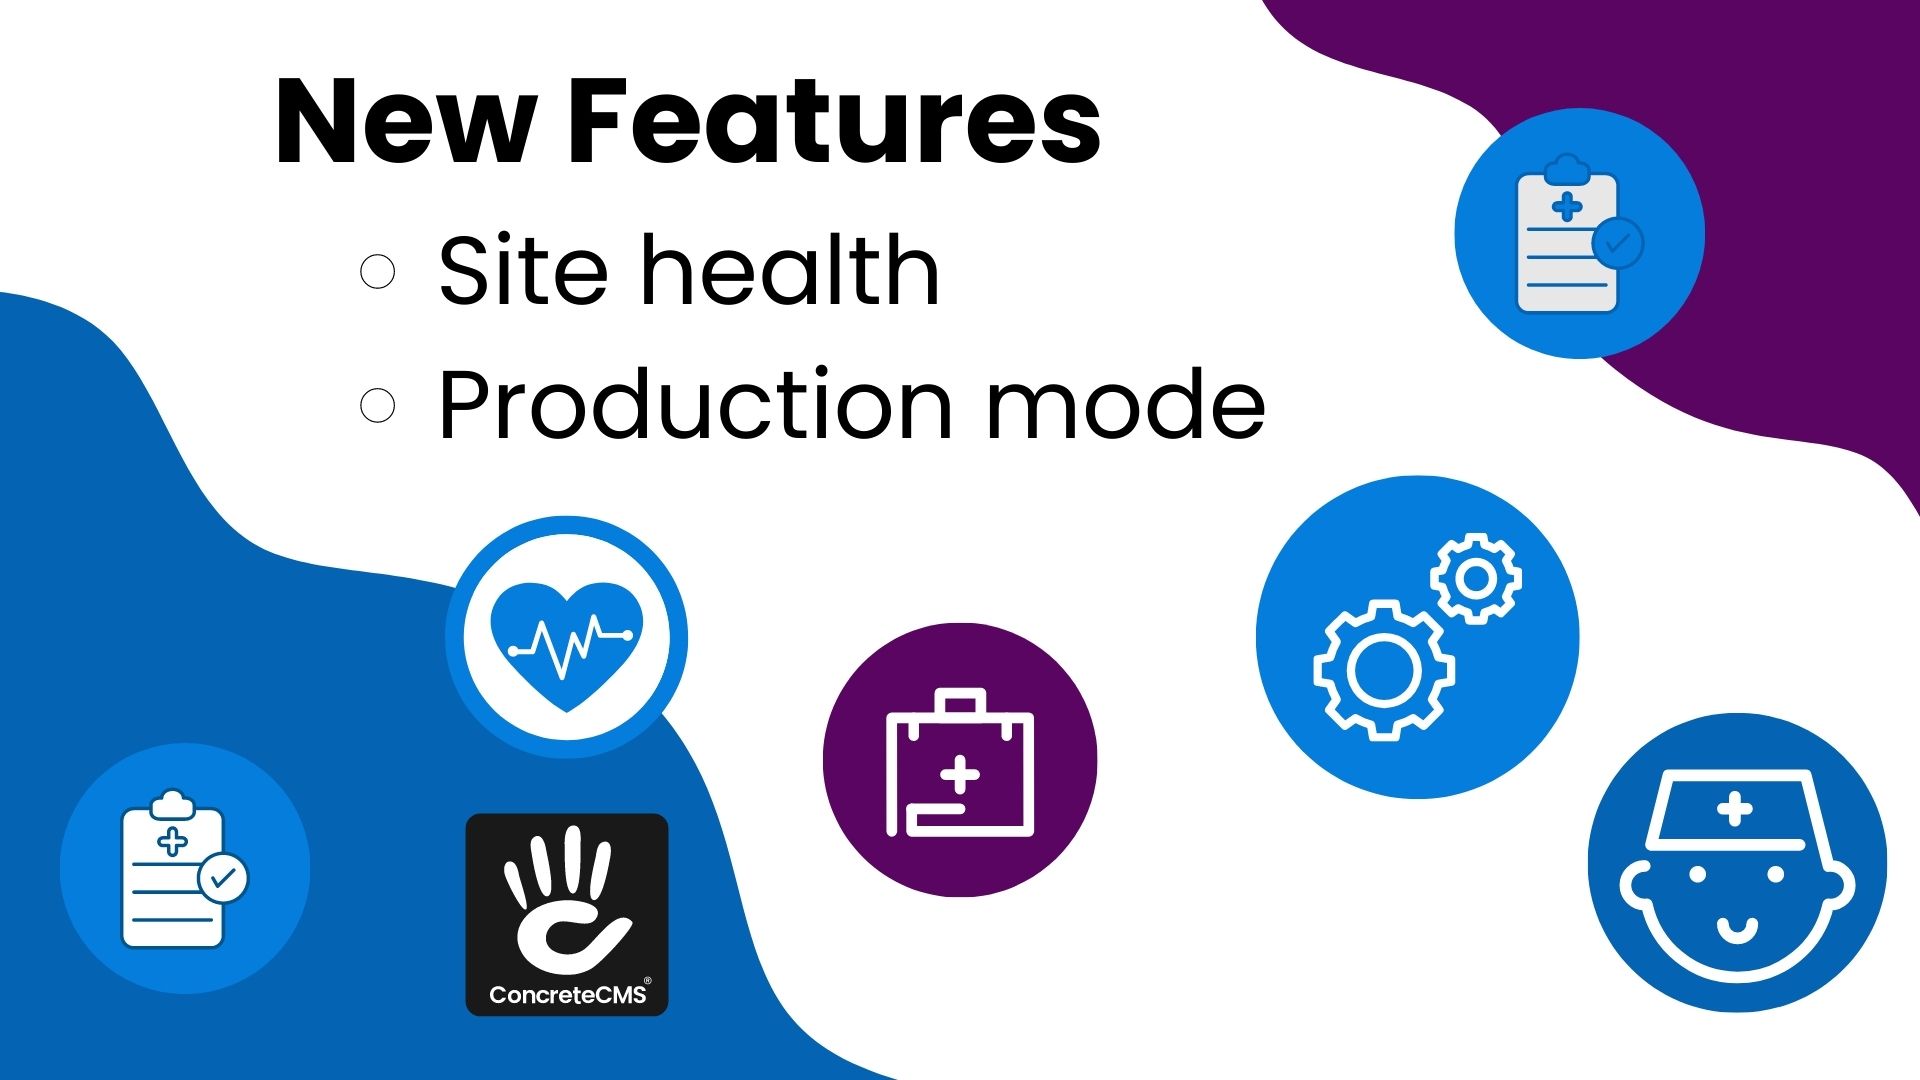 Production Mode and Site Health - 2 New Features Coming in 9.2.0